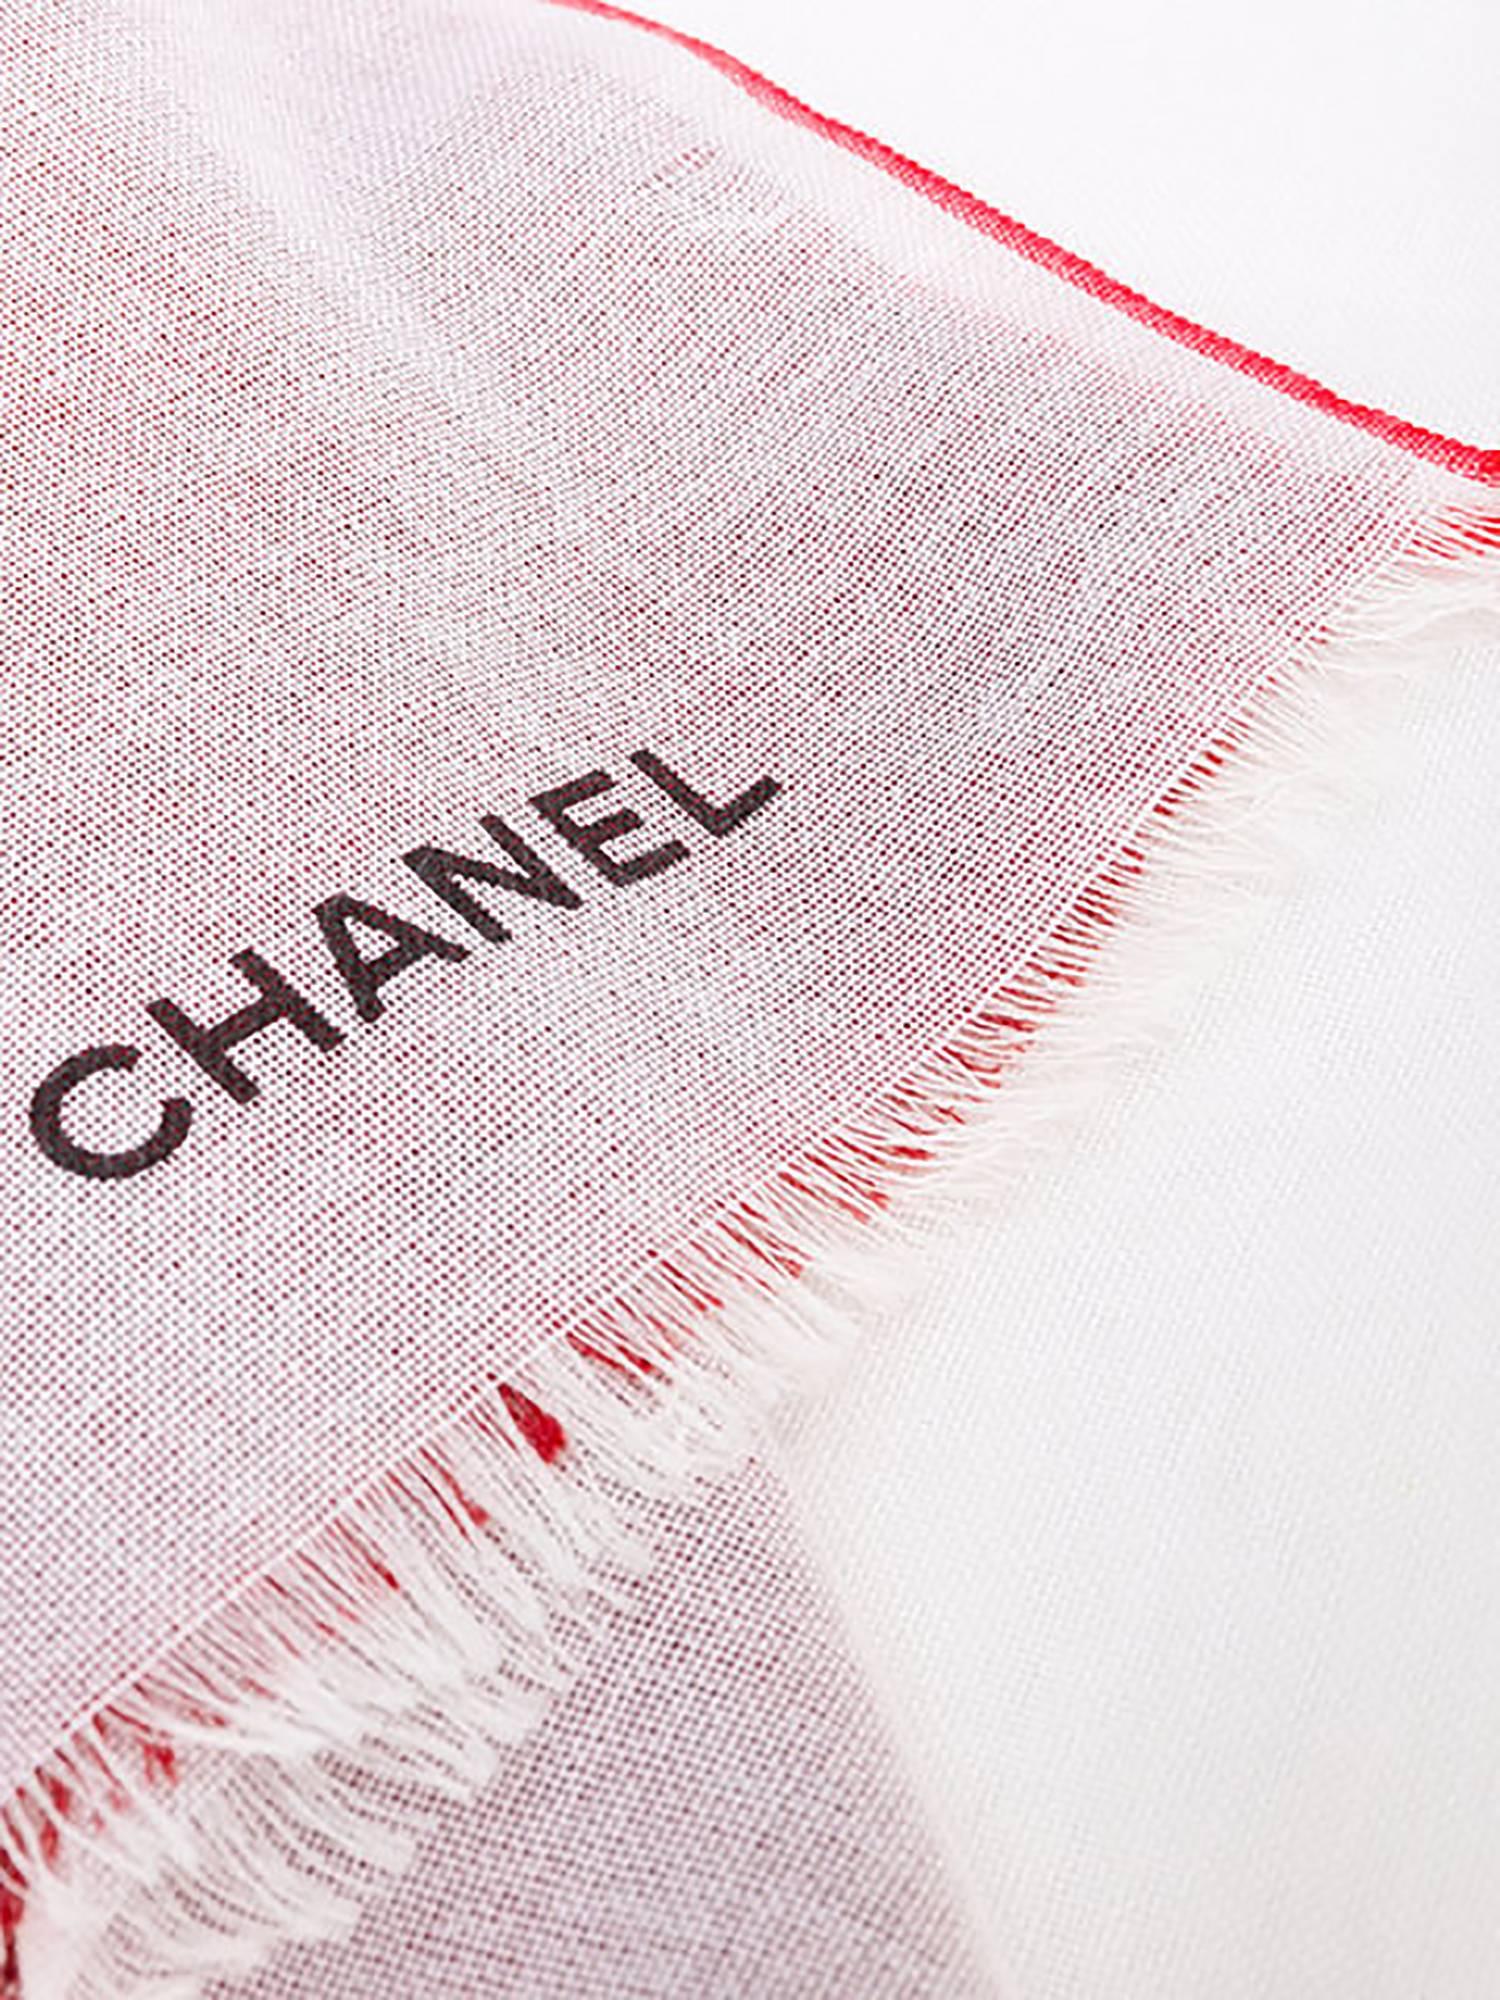 Red and white cashmere-silk blend dyed effect scarf from Chanel Vintage featuring fringed edges.

Dimensions: L180cm x H70

Please note that vintage items are not new and therefore might have minor imperfections.

Made in Italy